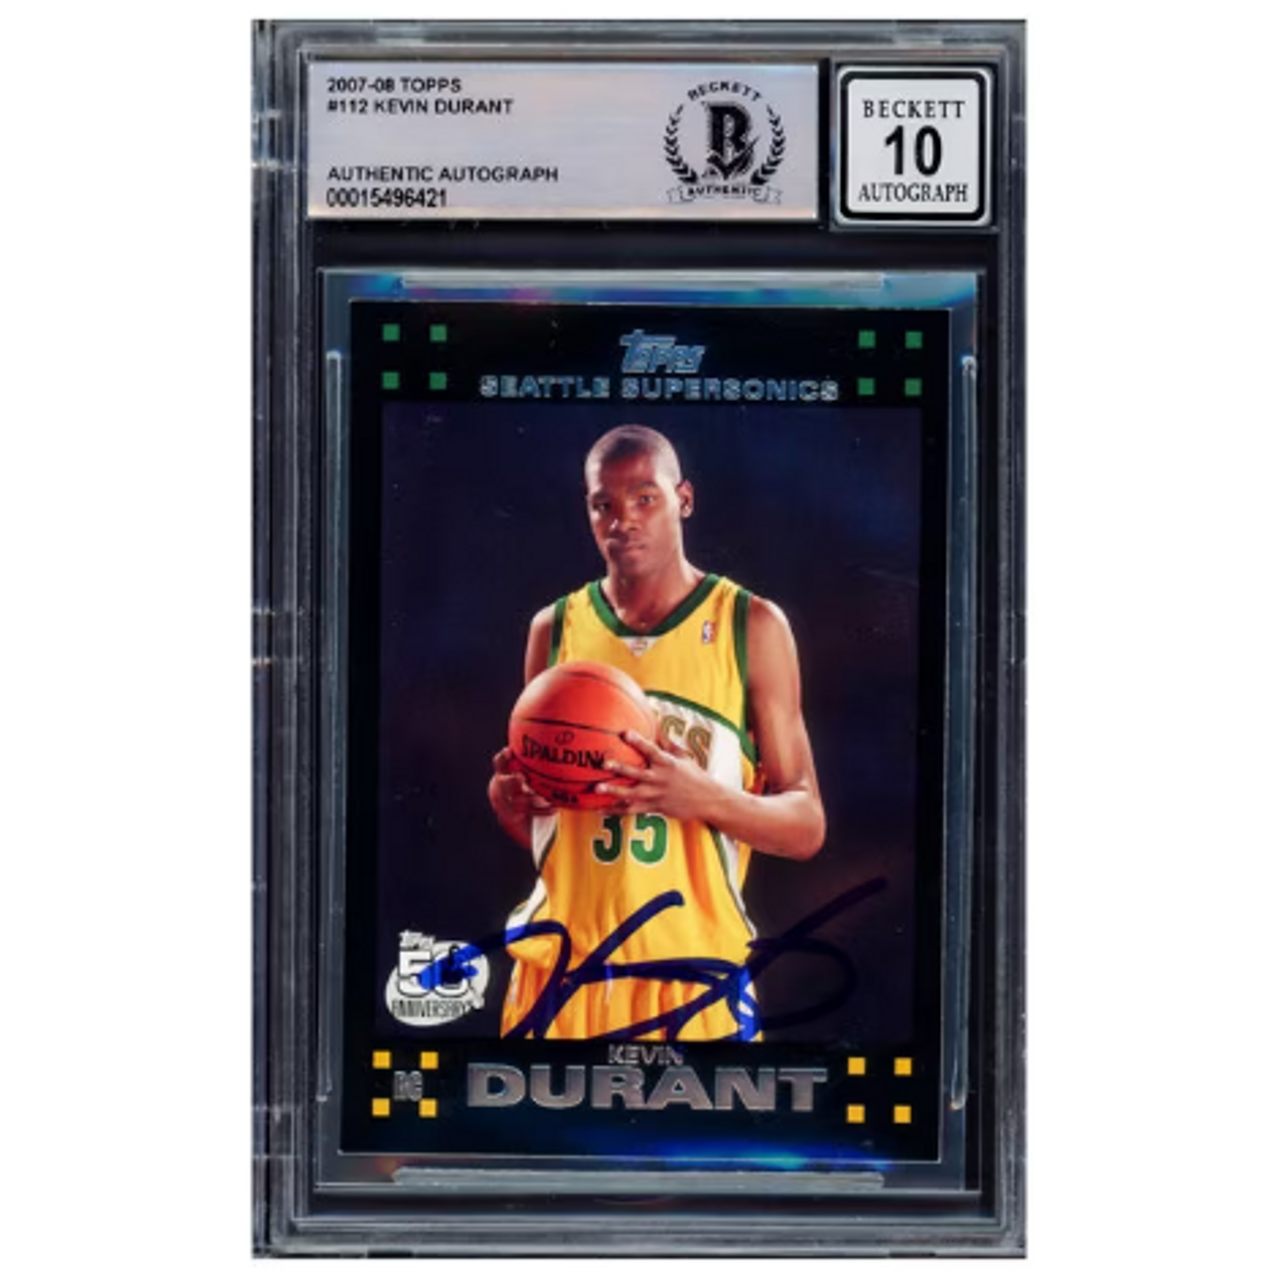 2009 KEVIN DURANT SEASON UPDATE ~HIGHLIGHTS~ CARD No. 14(MINT)